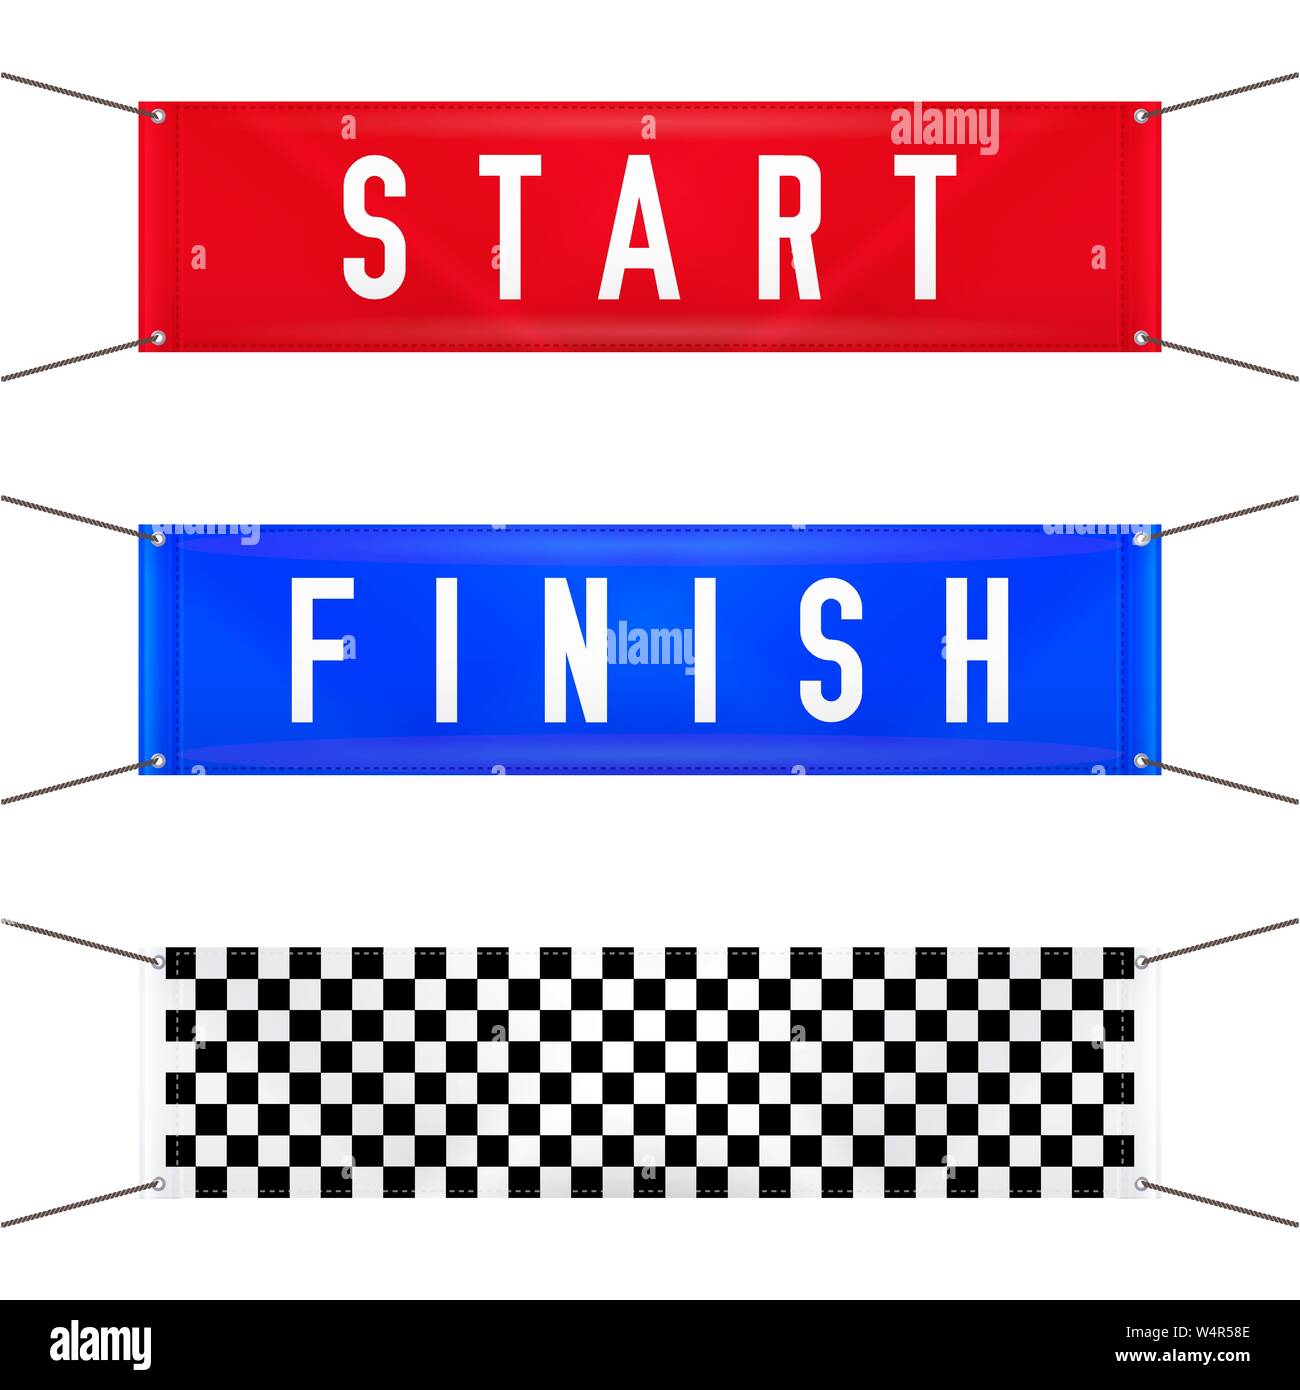 Start and Finish Hanging Banners. Vector Illustration Stock Vector